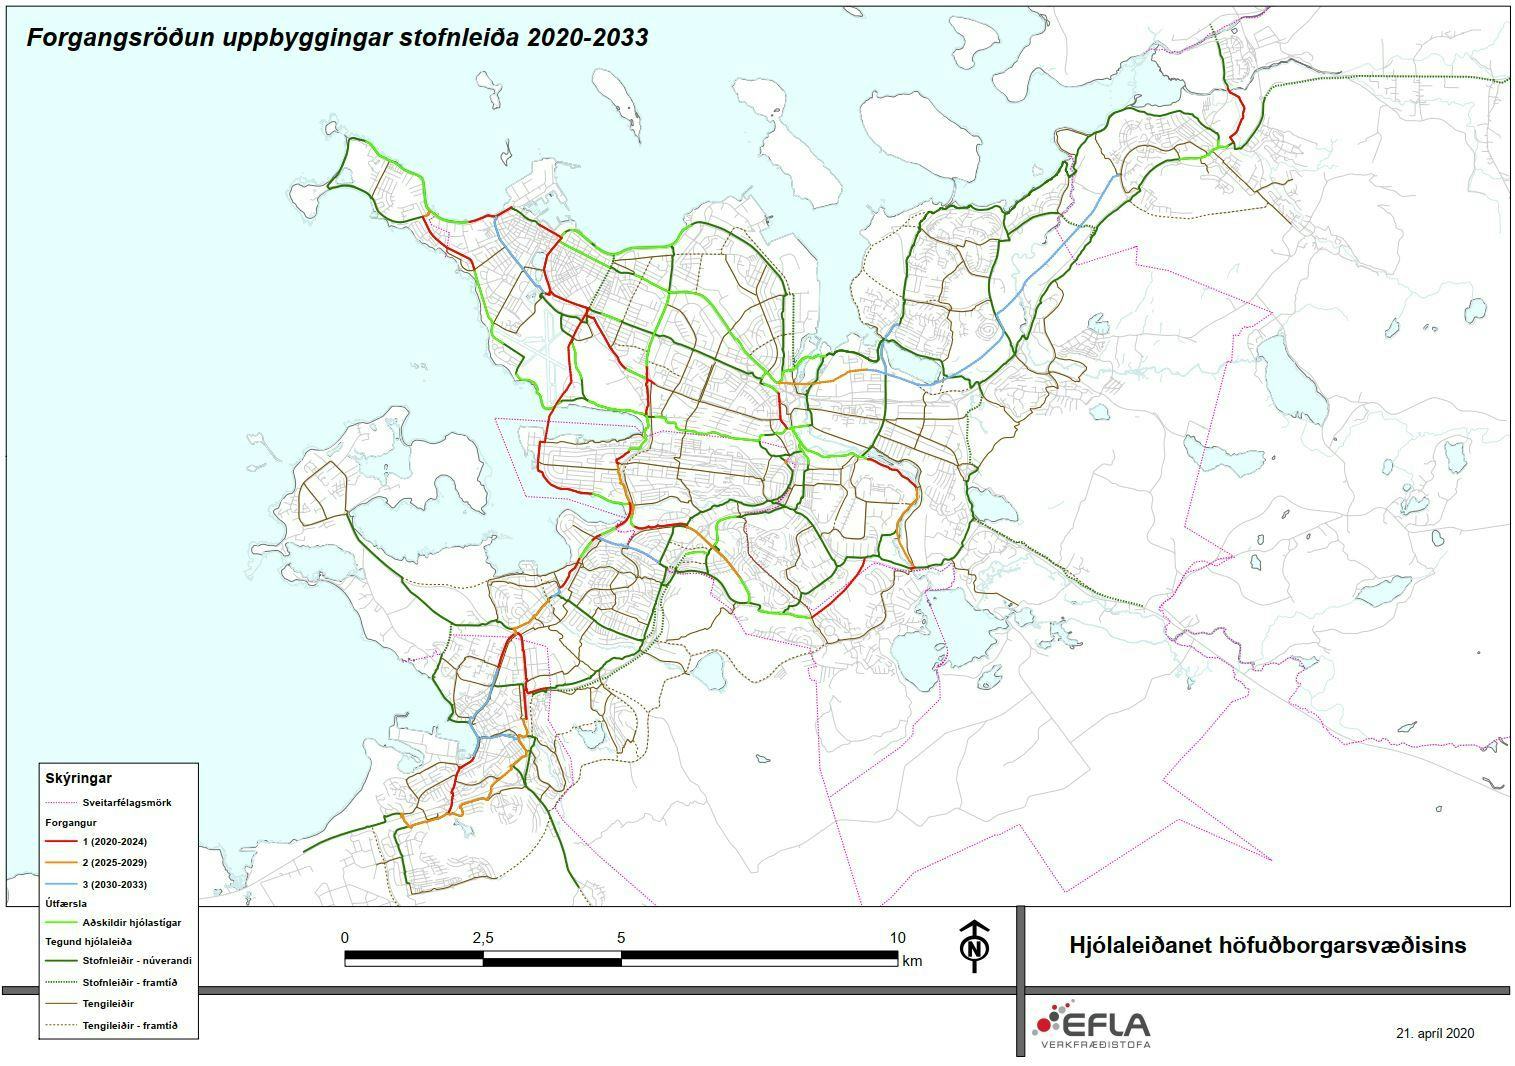 A map with various lines representing roads or connections